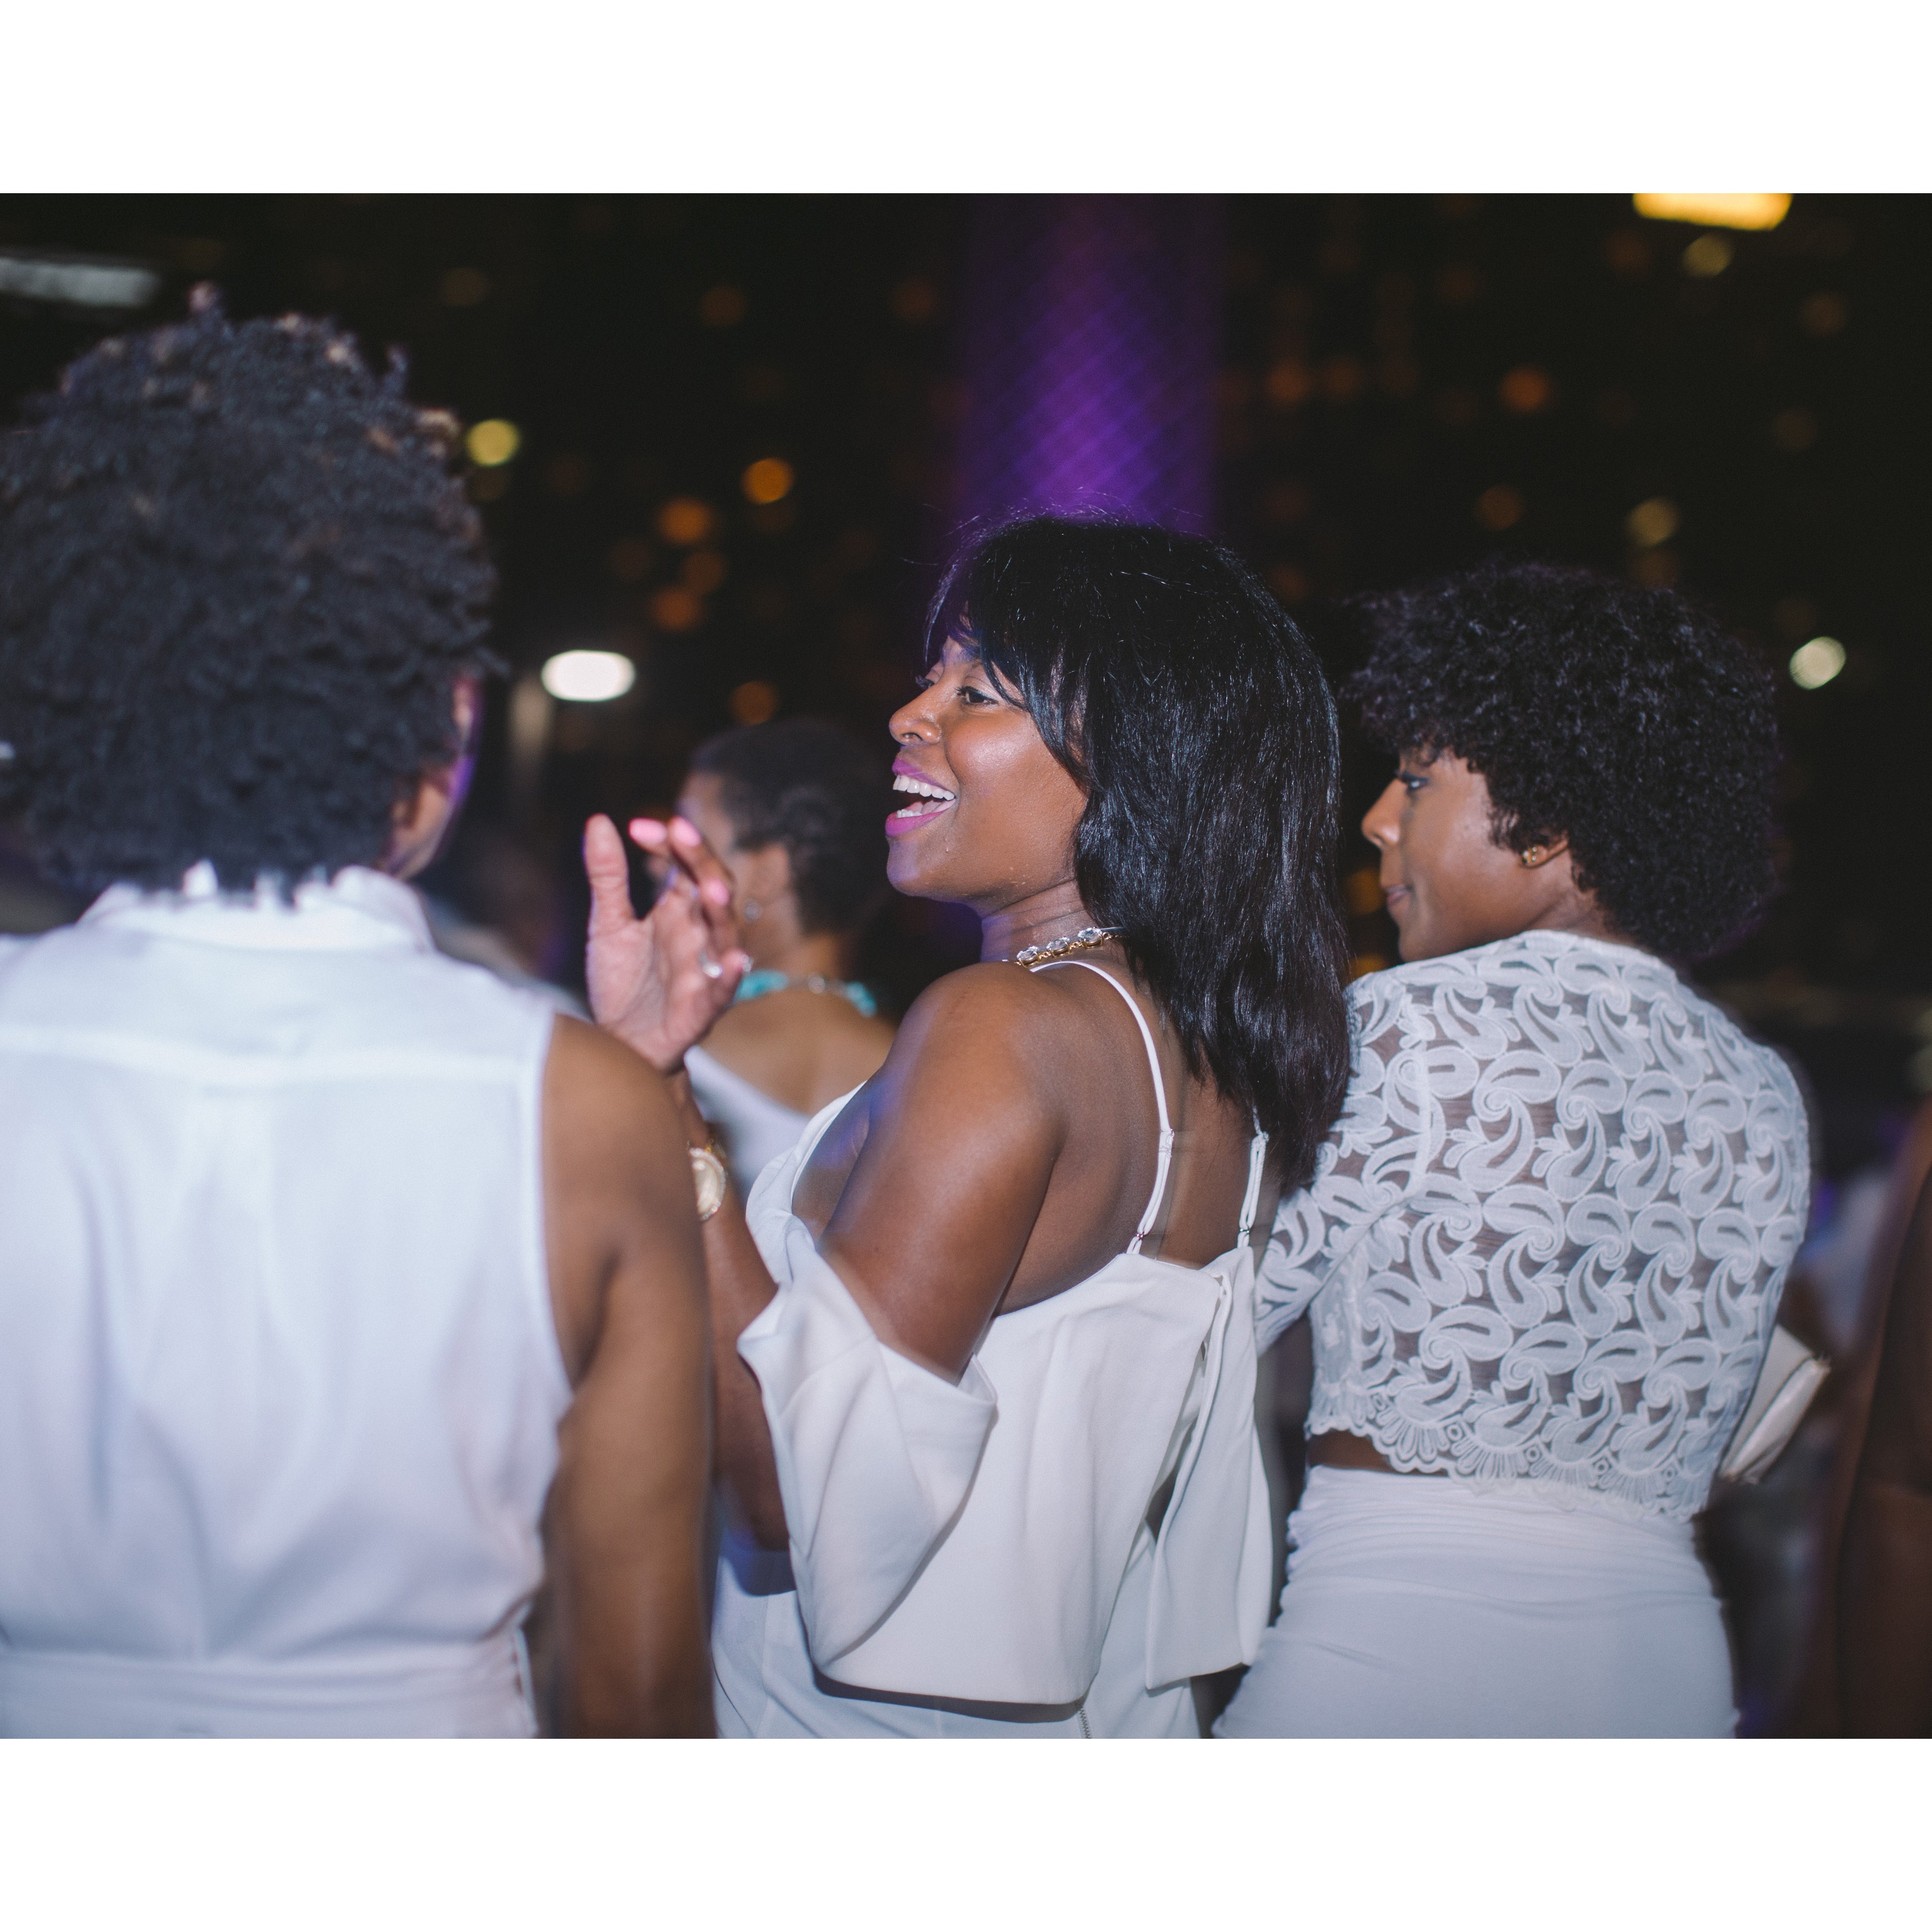 The Fashion and Fun At 'Dîner en Blanc' Will Leave You Ready for New Orleans
